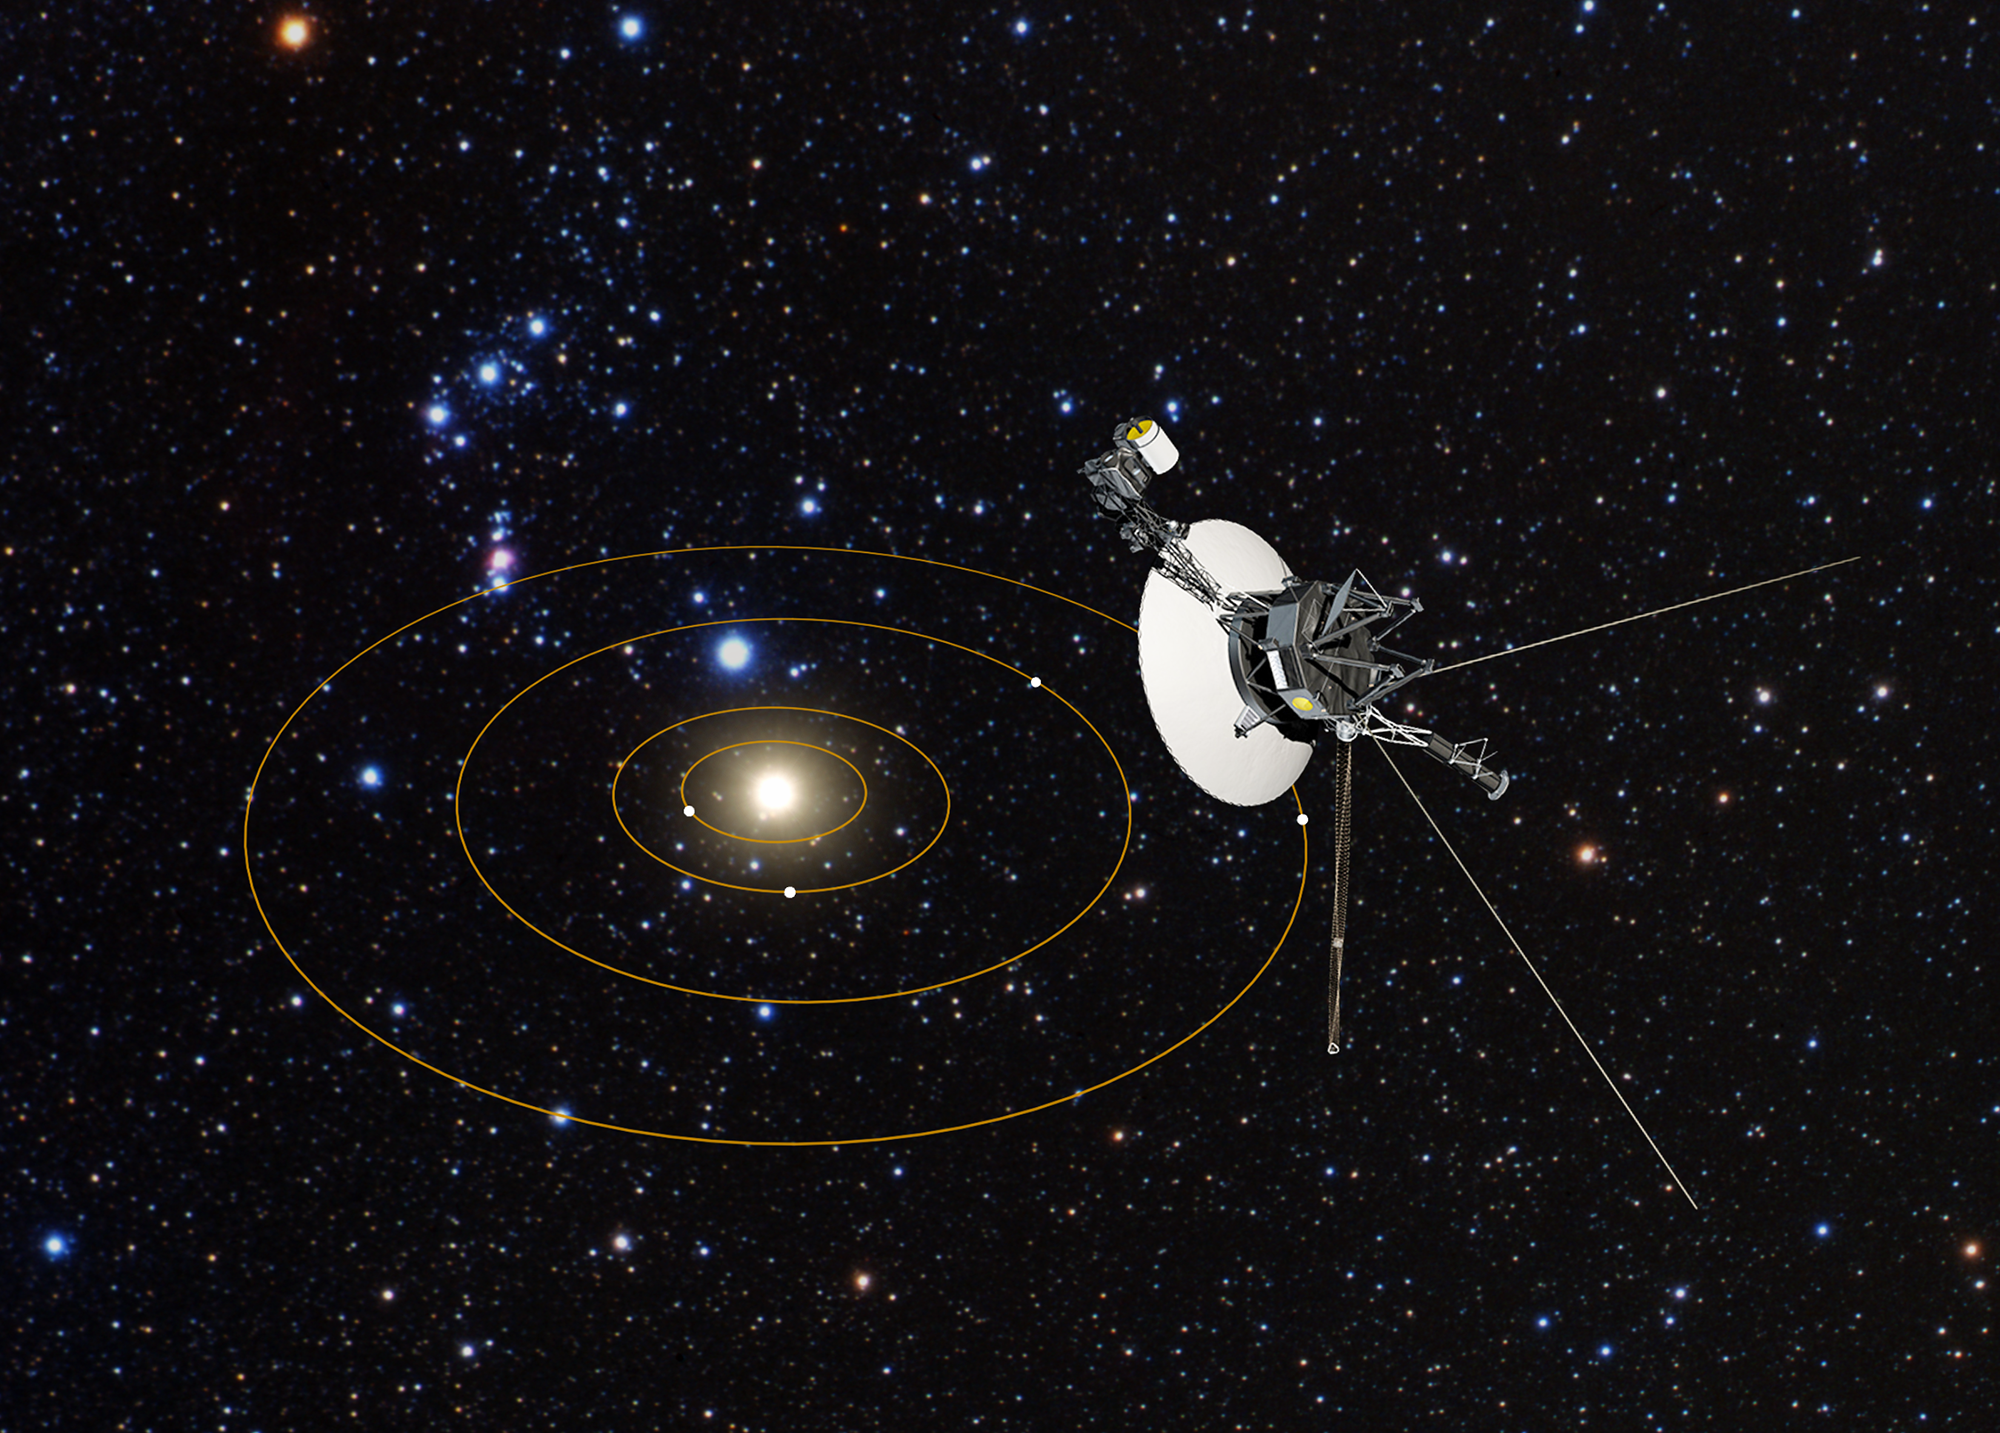 Voyager 1 and the solar system with orbits